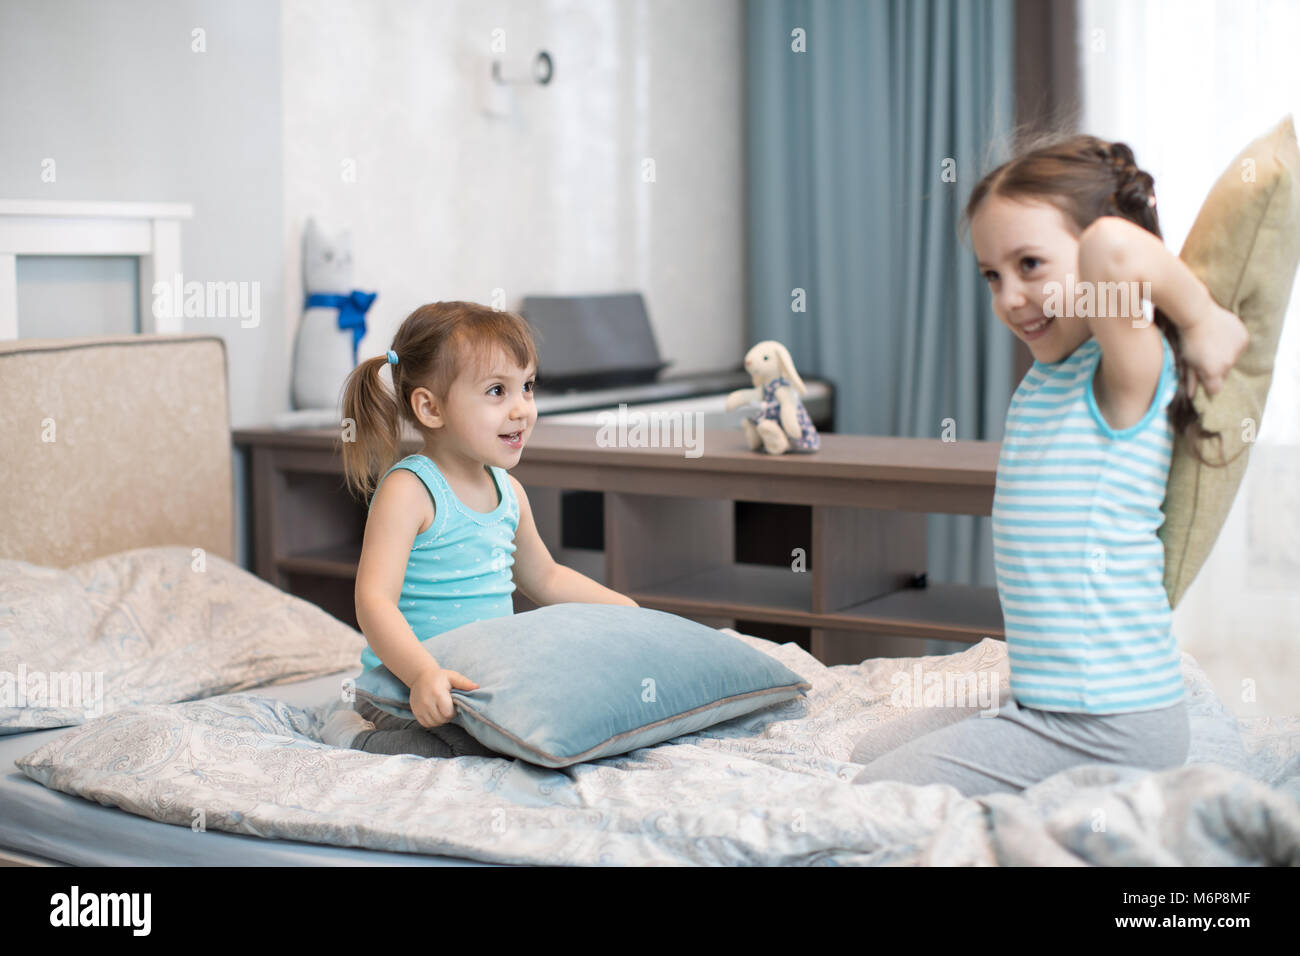 Little kids sisters fighting using pillows in bedroom Stock Photo